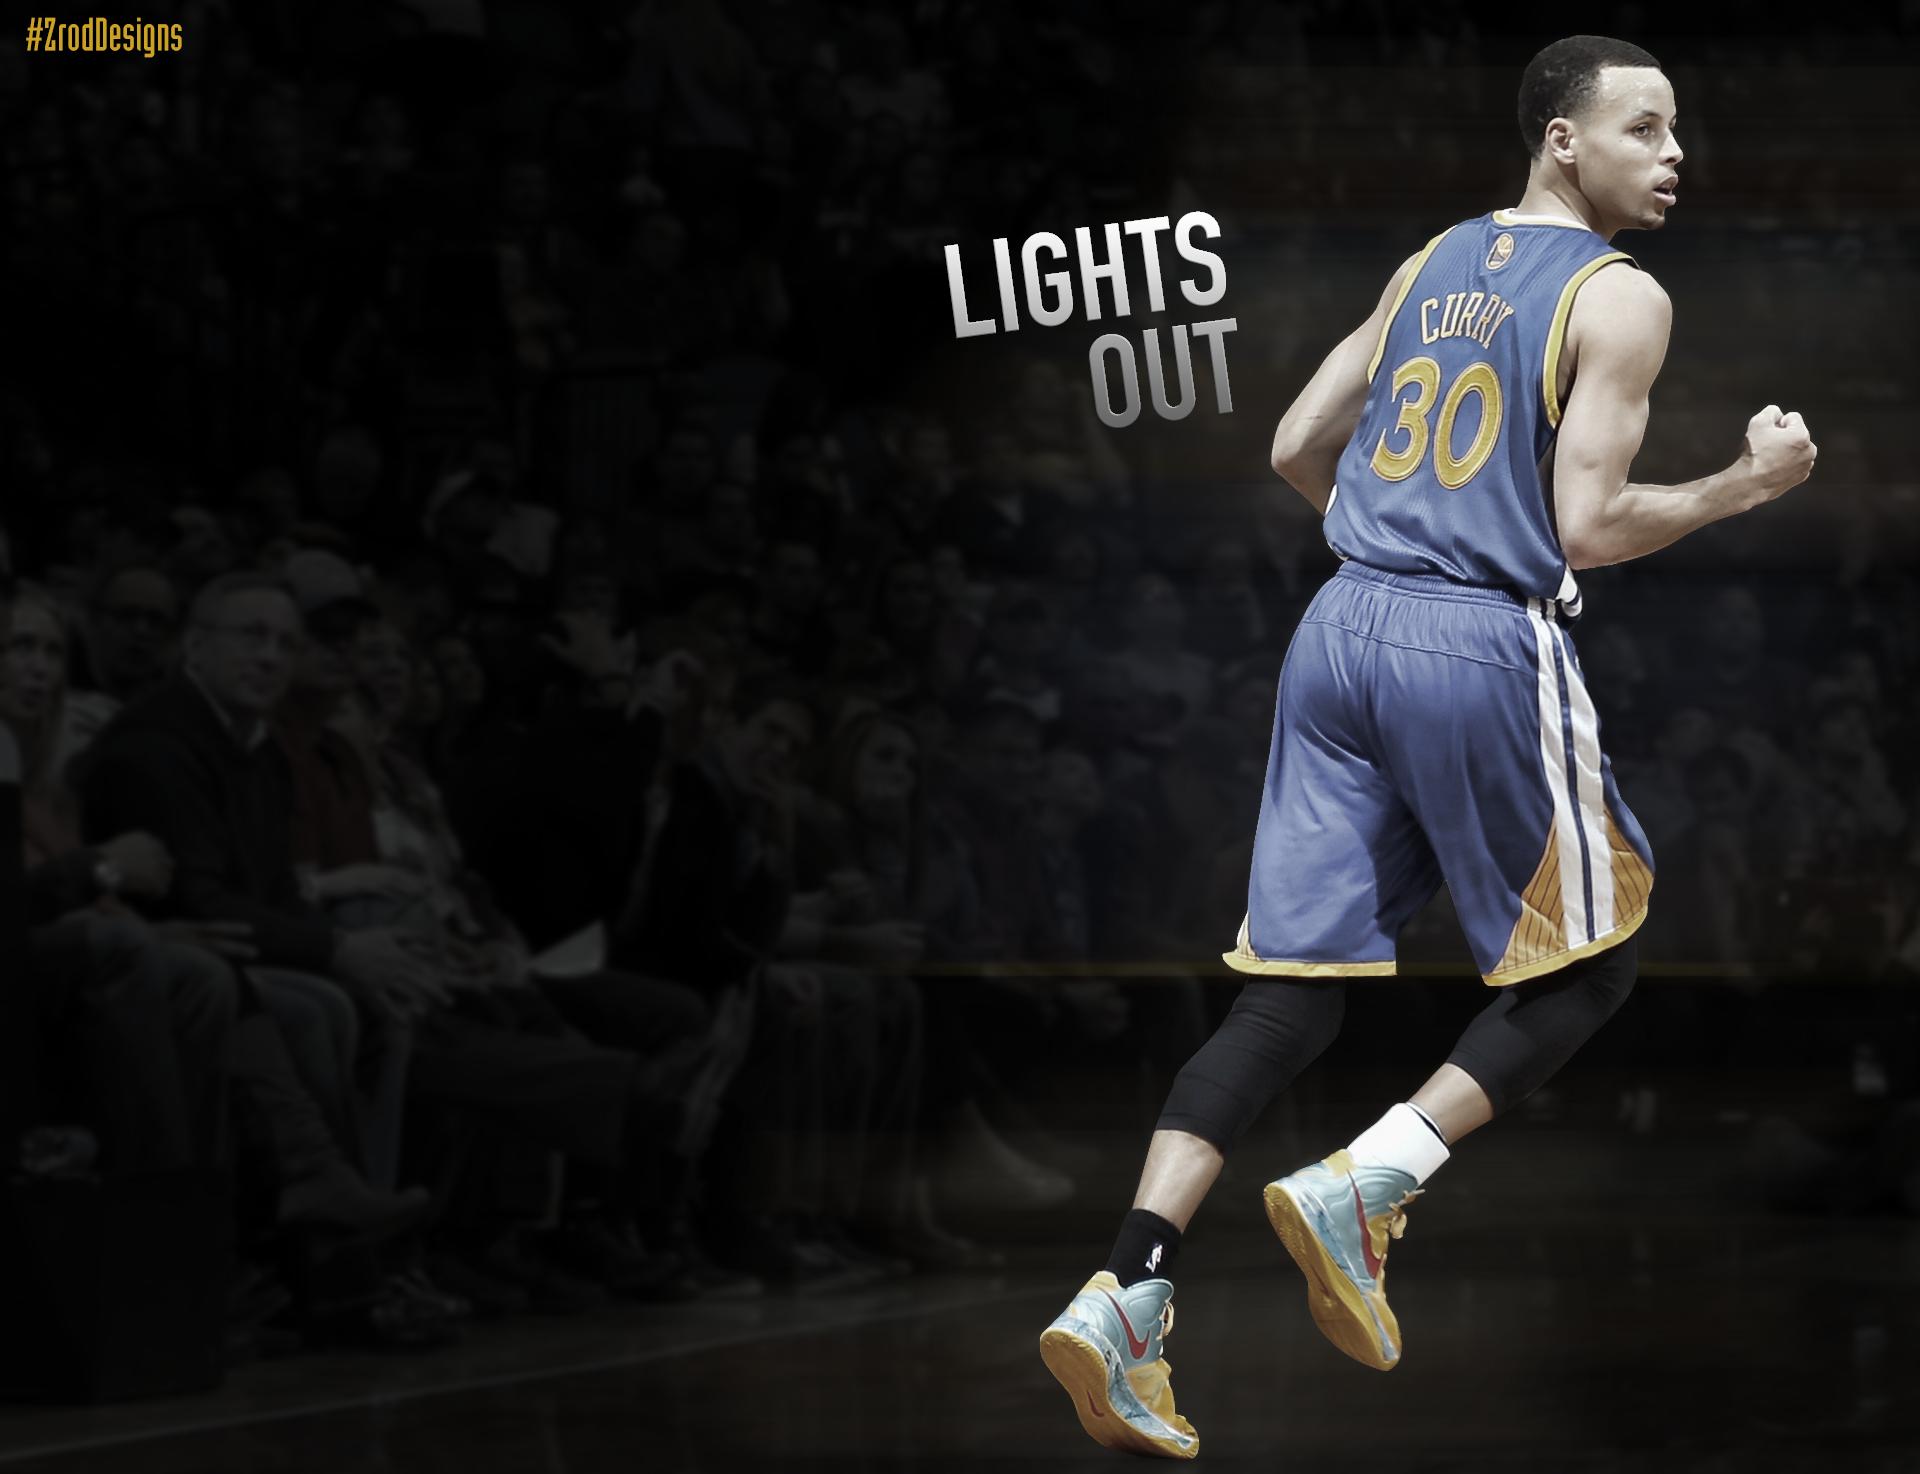 Stephen Curry Lights Out Wallpaper - Stephen Curry Wallpaper For Mac - HD Wallpaper 